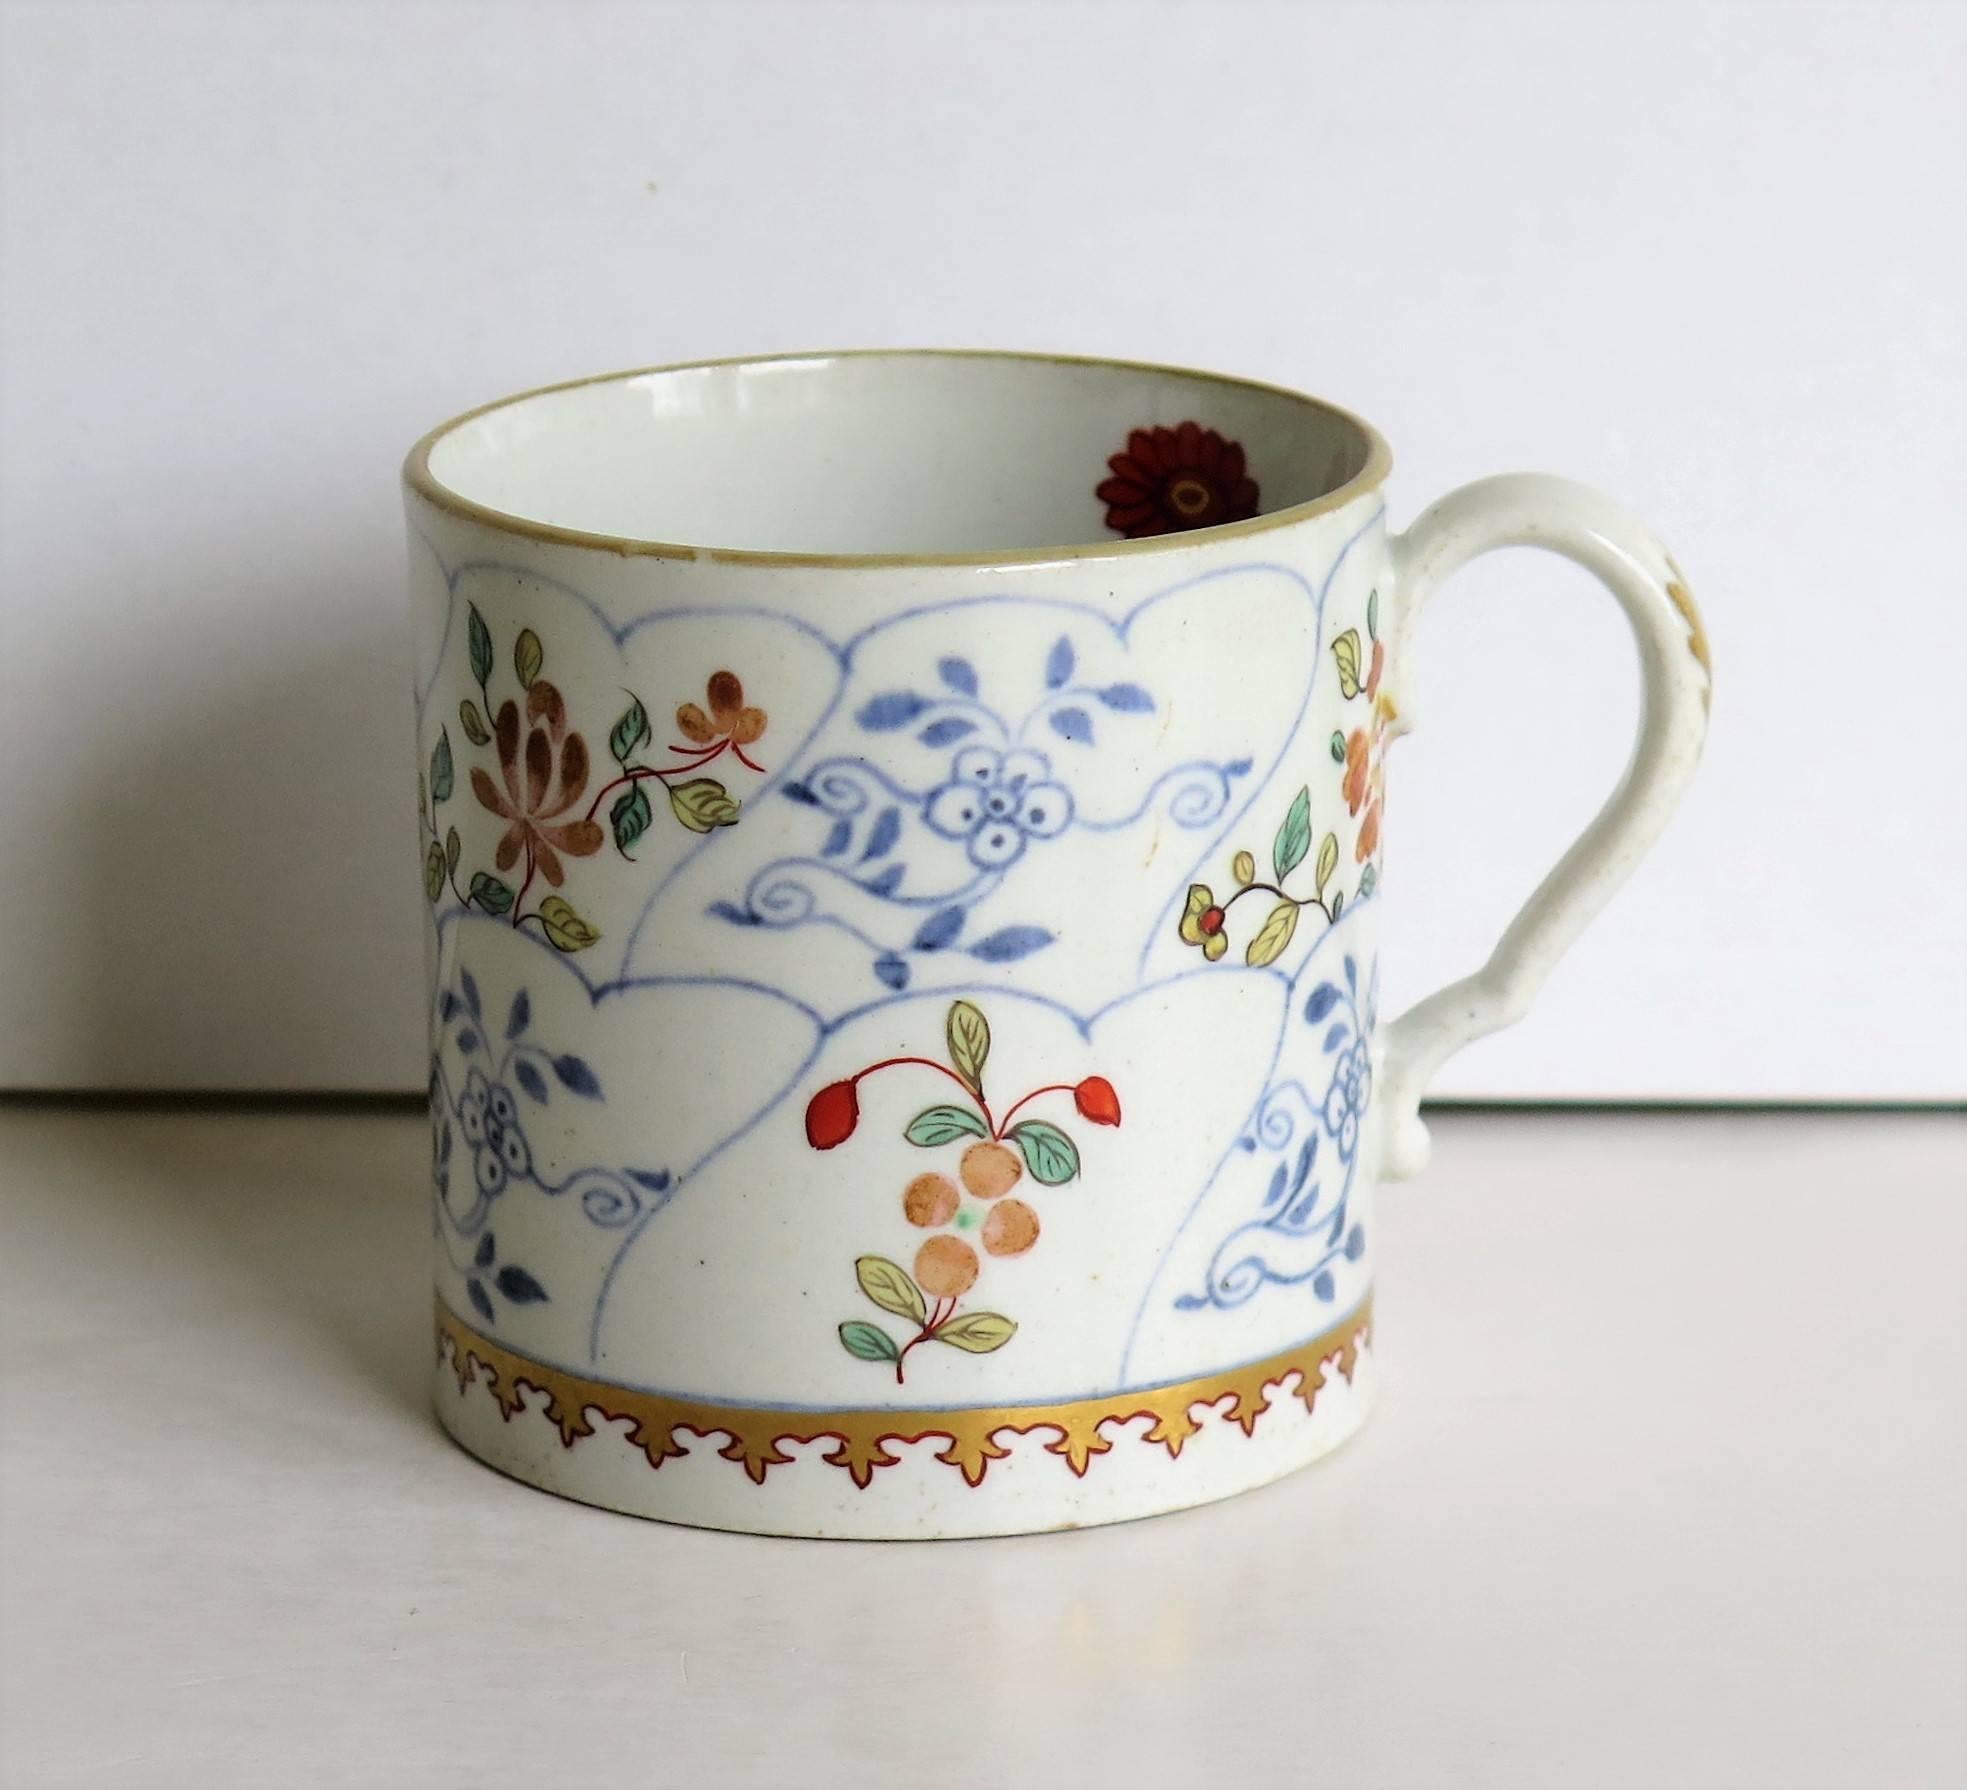 This is a very good example of an English, coffee can, made by Copeland and Garret, circa 1833-1844. W.T. Copeland purchased the Spode factory and made Thomas Garrett a partner in April 1833.

The can is nominally straight sided and has the Spode